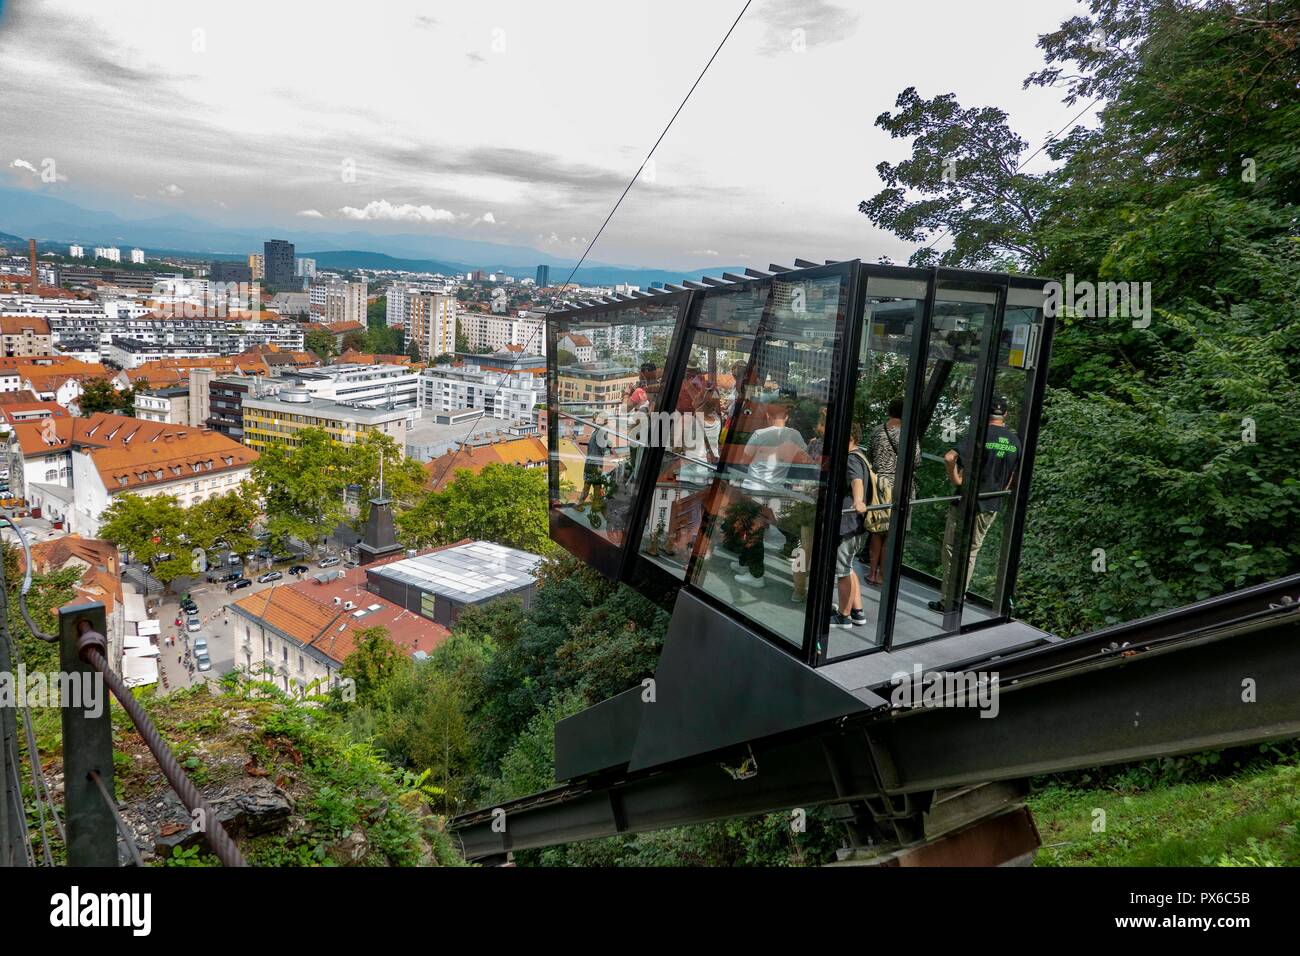 Slovenia, Ljubiljana, Riding up to the castle in a funicular railway is one of the main attractions of Ljubljana, Stock Photo